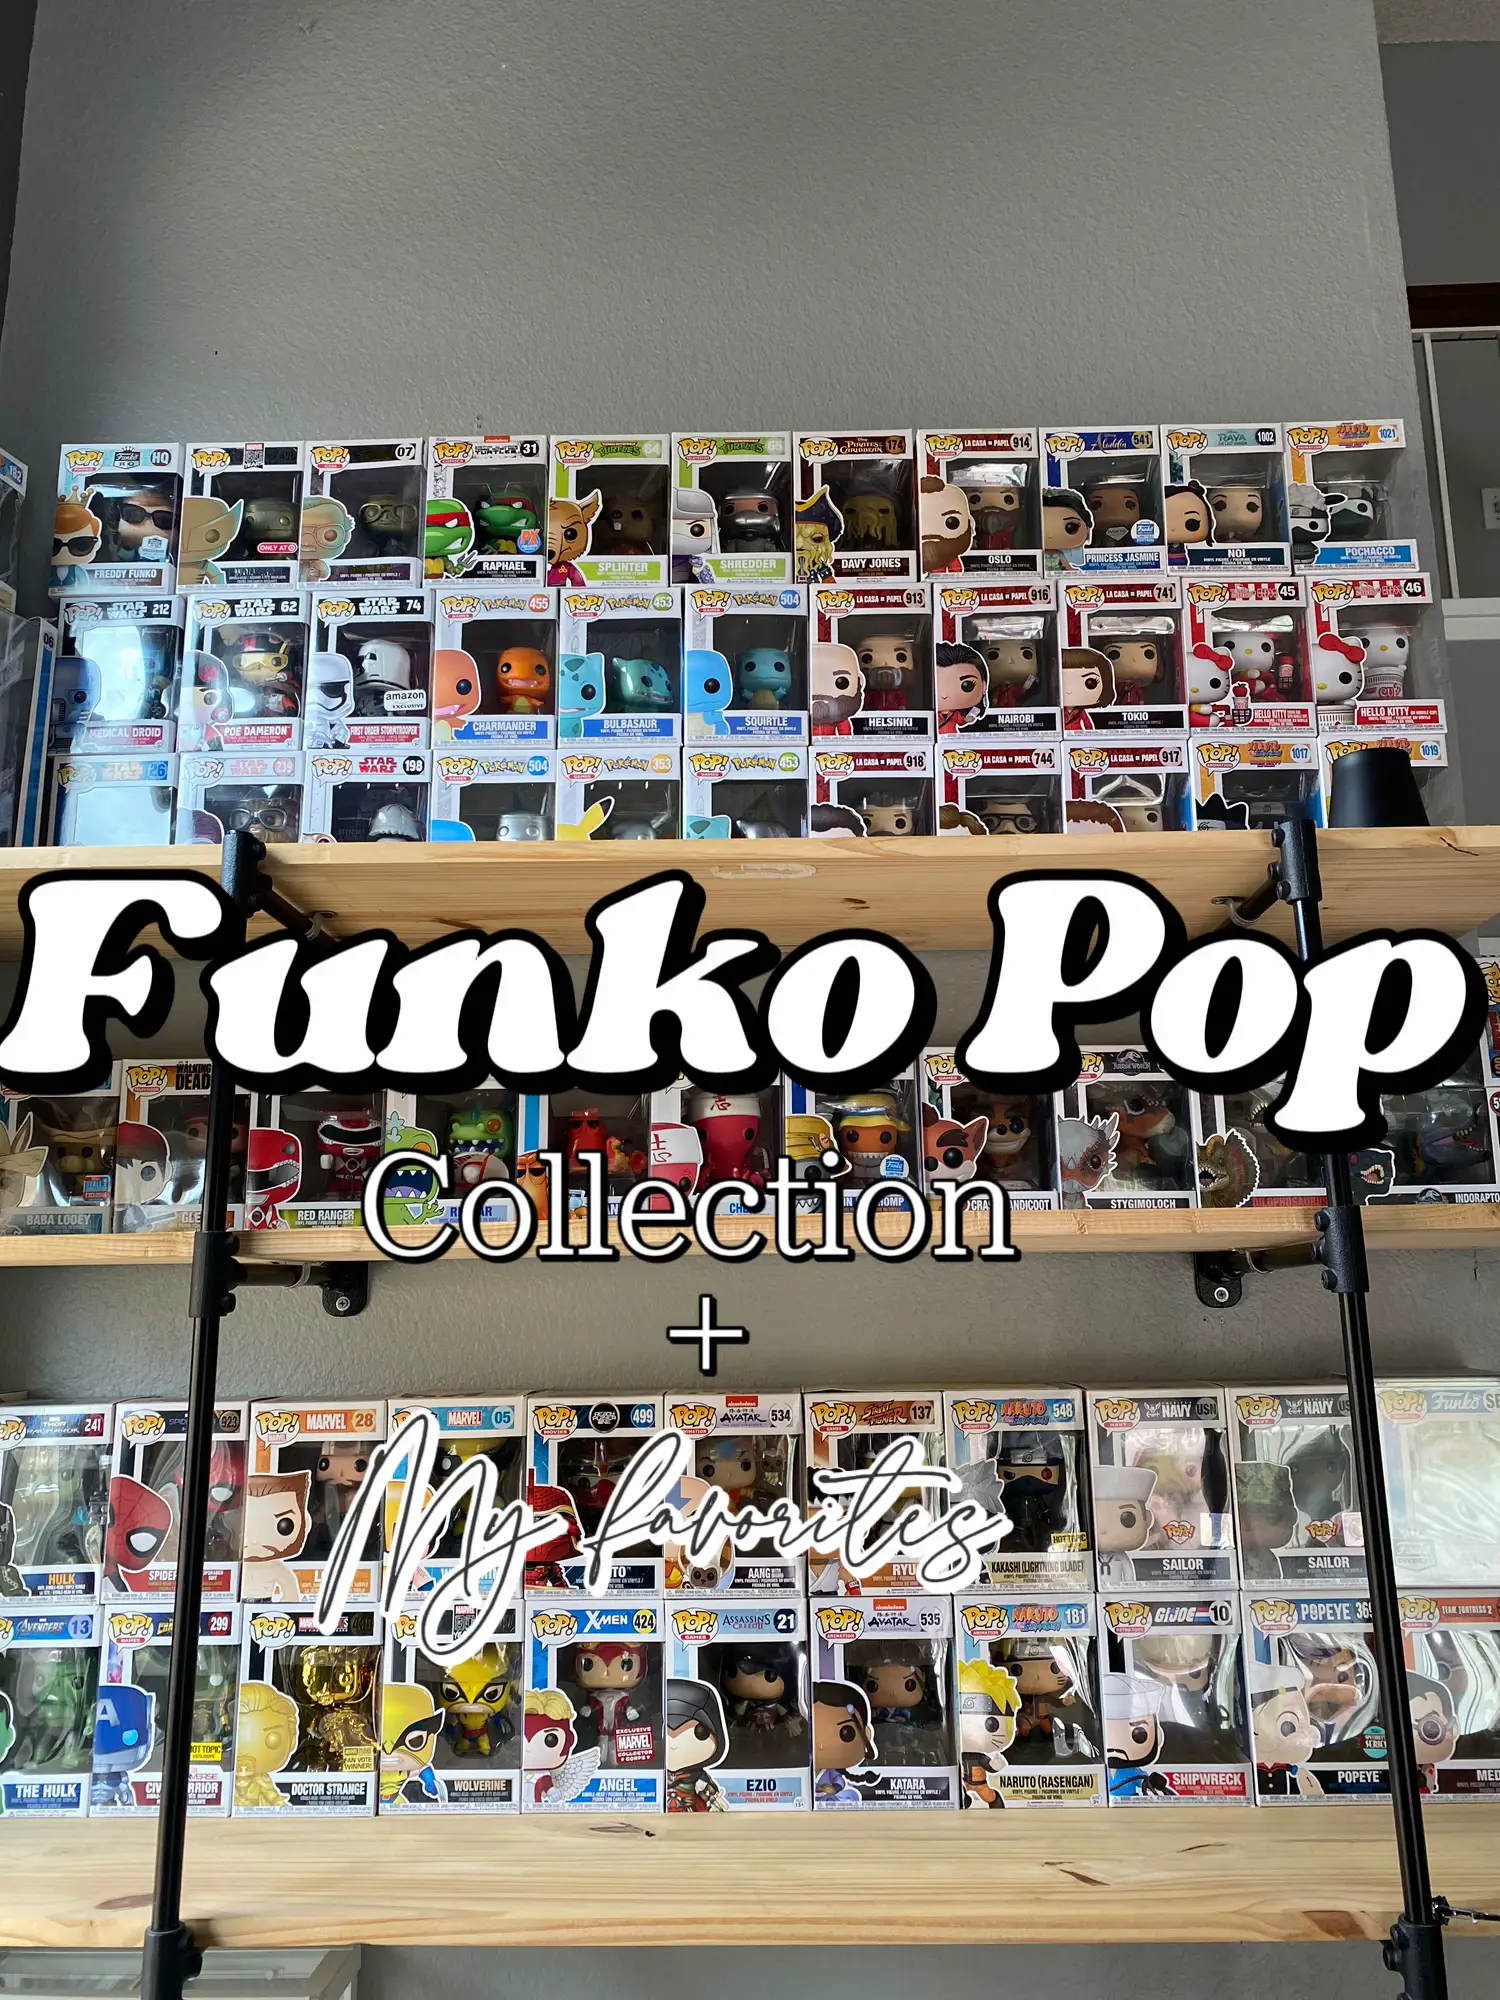 making taylor swift at the funko pop store｜TikTok Search, Taylor